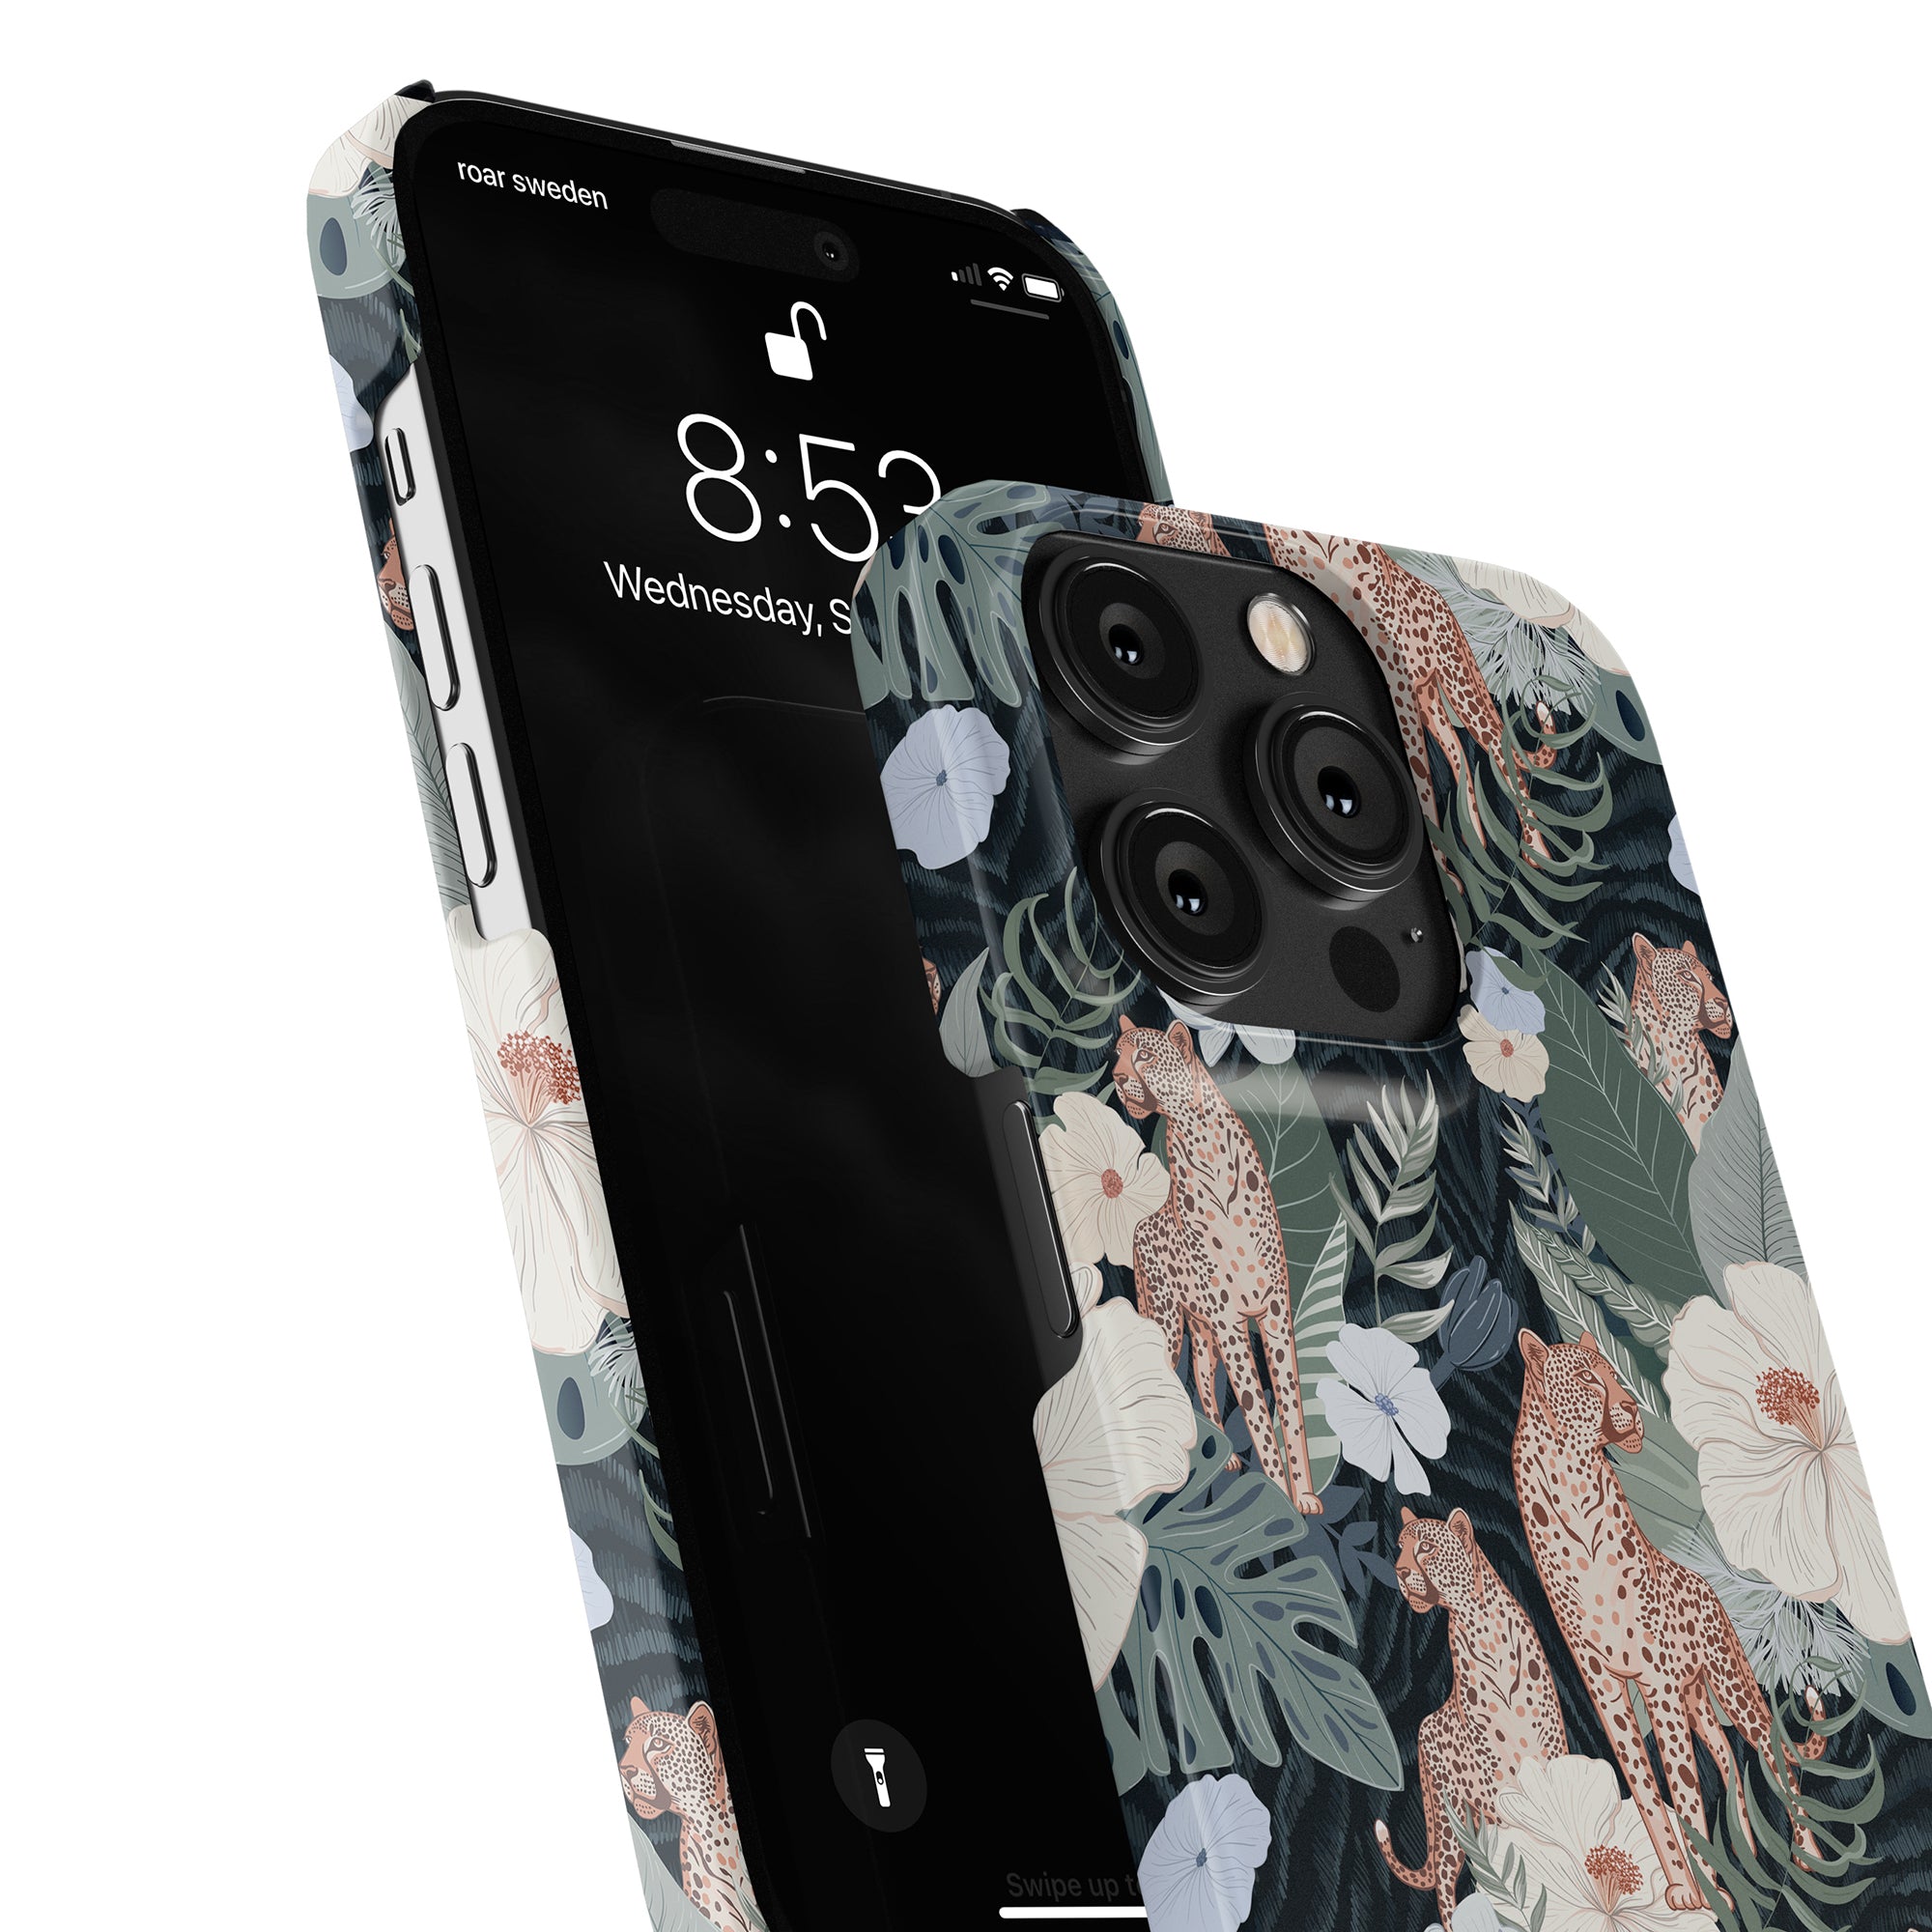 A Leopardess - Slim case with an image of a giraffe and flowers.